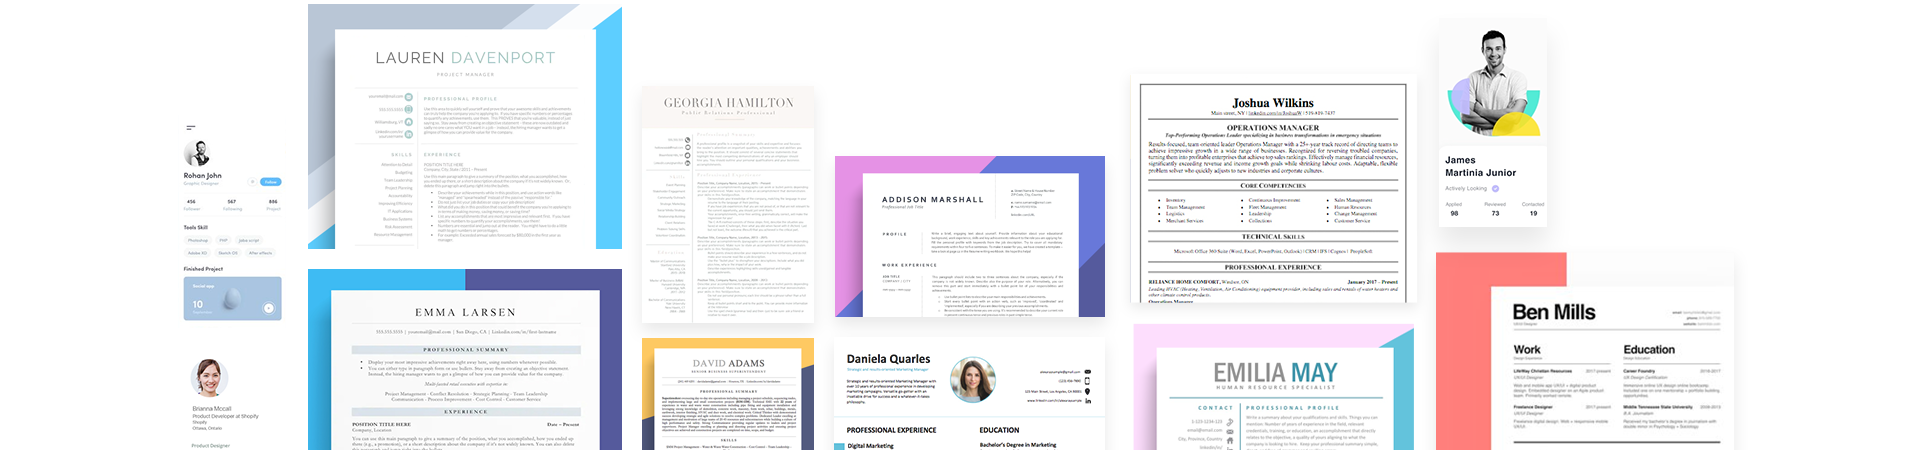 professional resume writer services